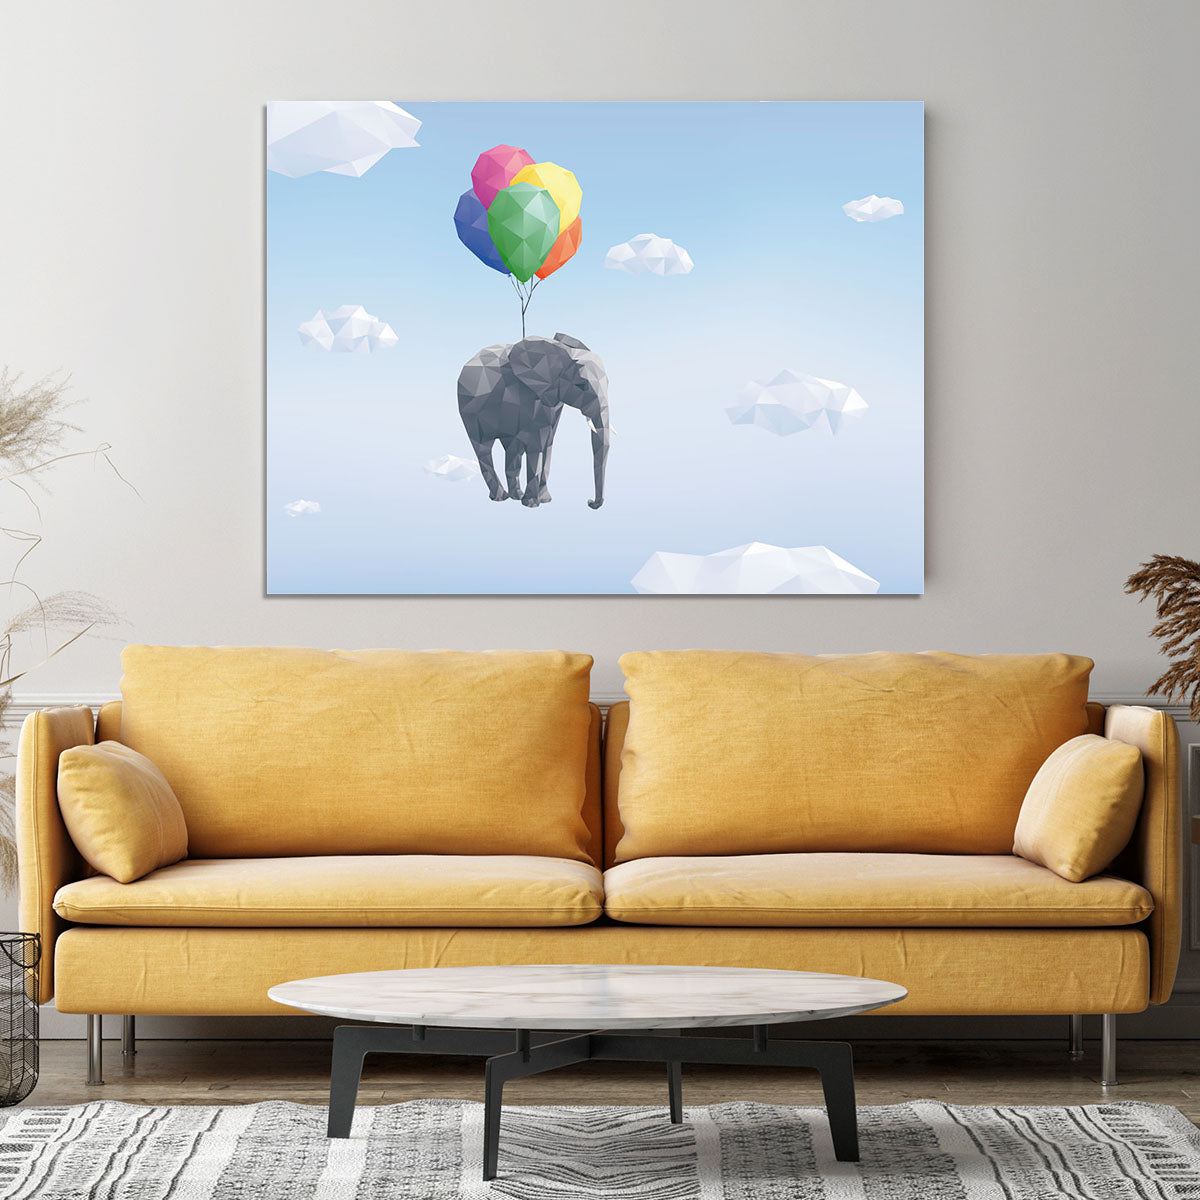 Low Poly Elephant attached to balloons flying through cloudy sky Canvas Print or Poster - Canvas Art Rocks - 4